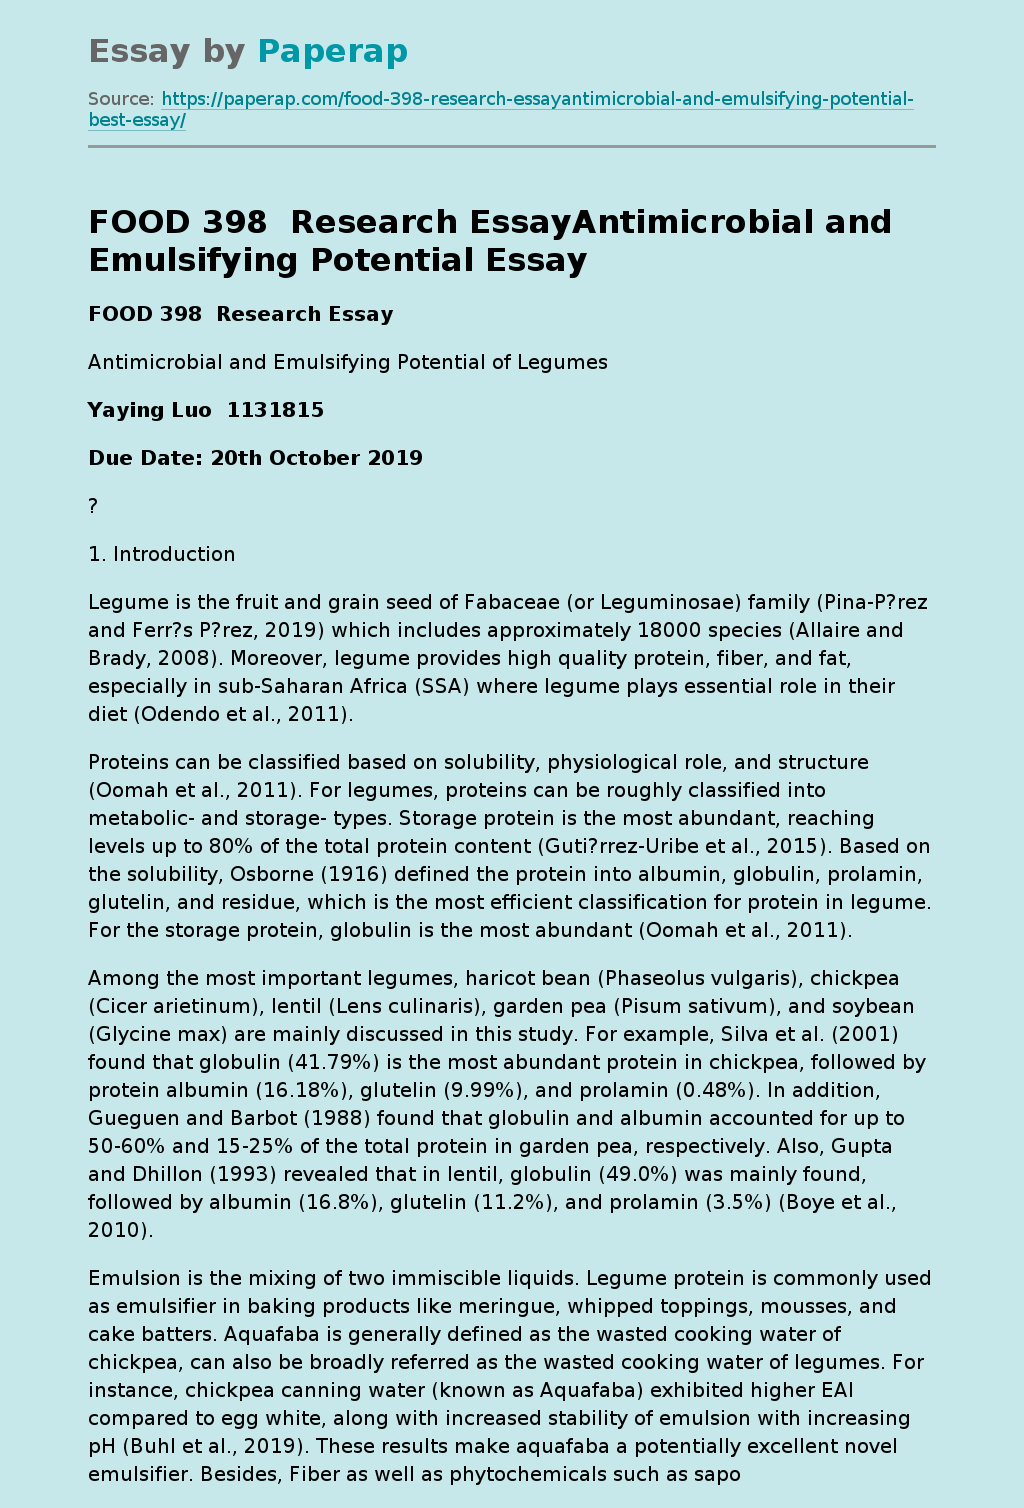 Research Essay Antimicrobial and Emulsifying Potential